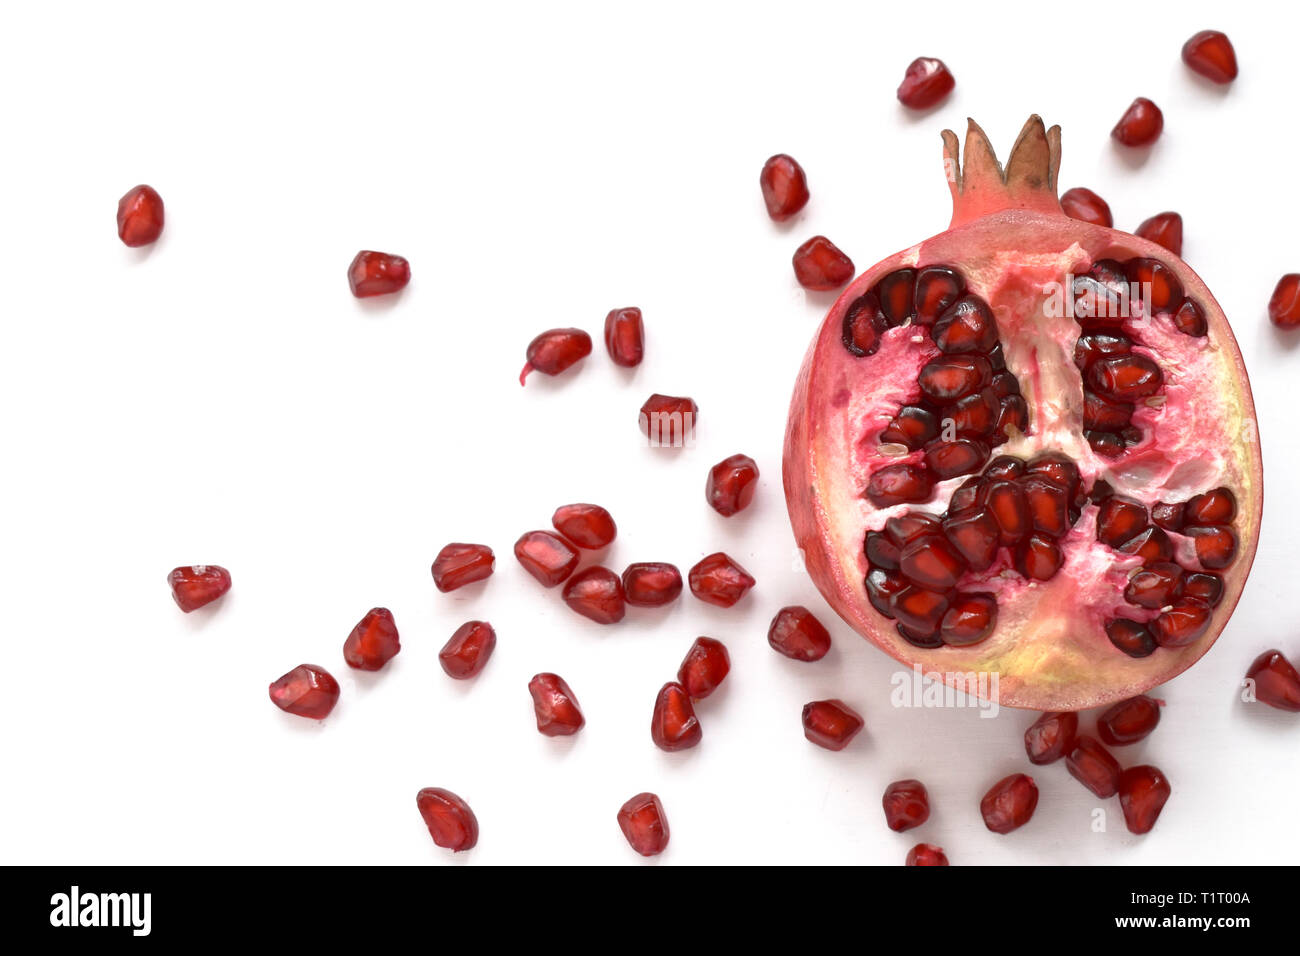 Pomegranate fruit isolated on the white background. Red ripe exotic juicy dessert healthy snack. Whole raw diet organic food. Stock Photo